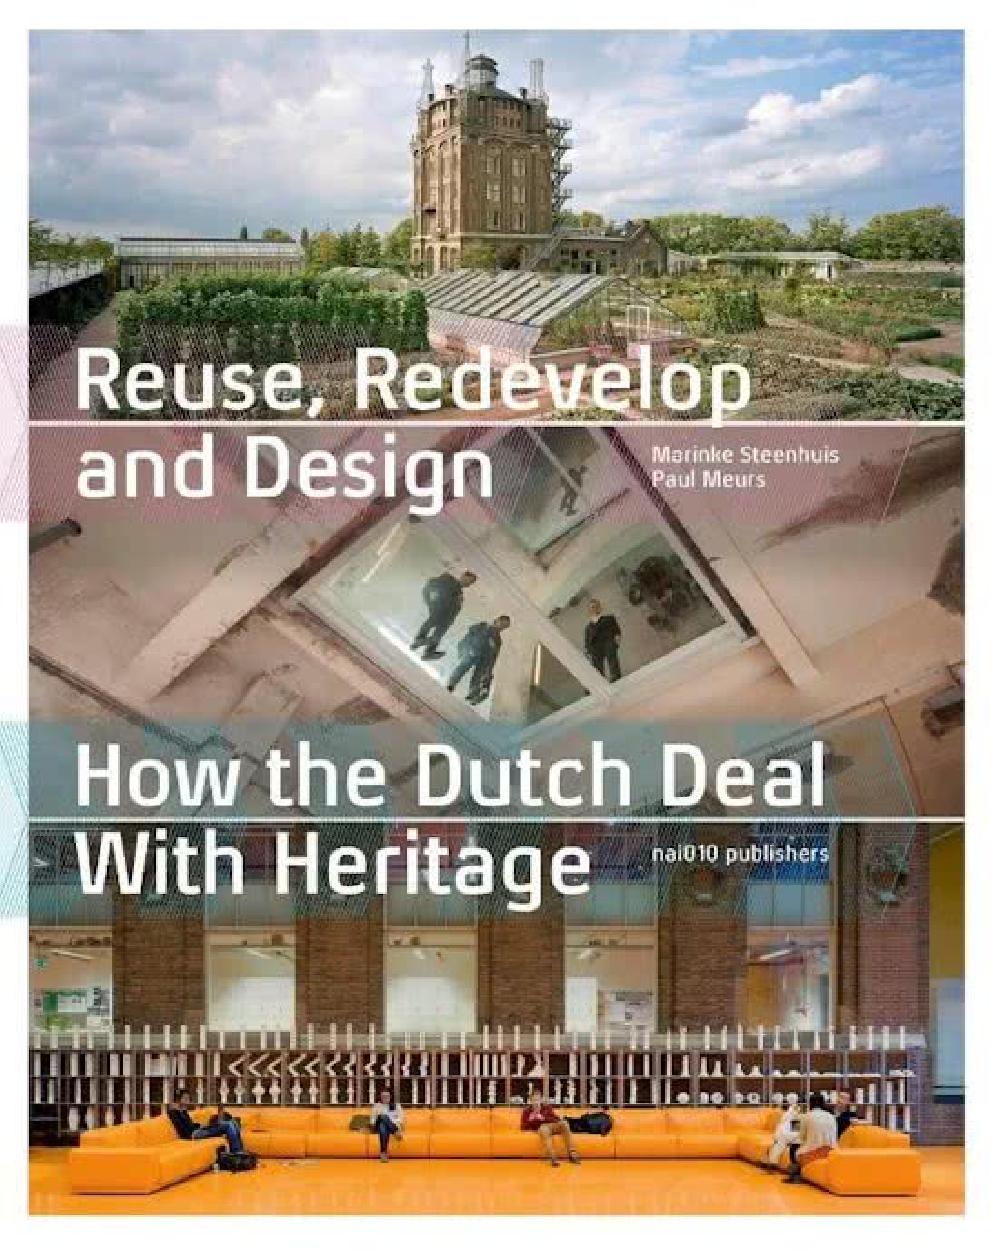 Reuse, Redevelop and Design